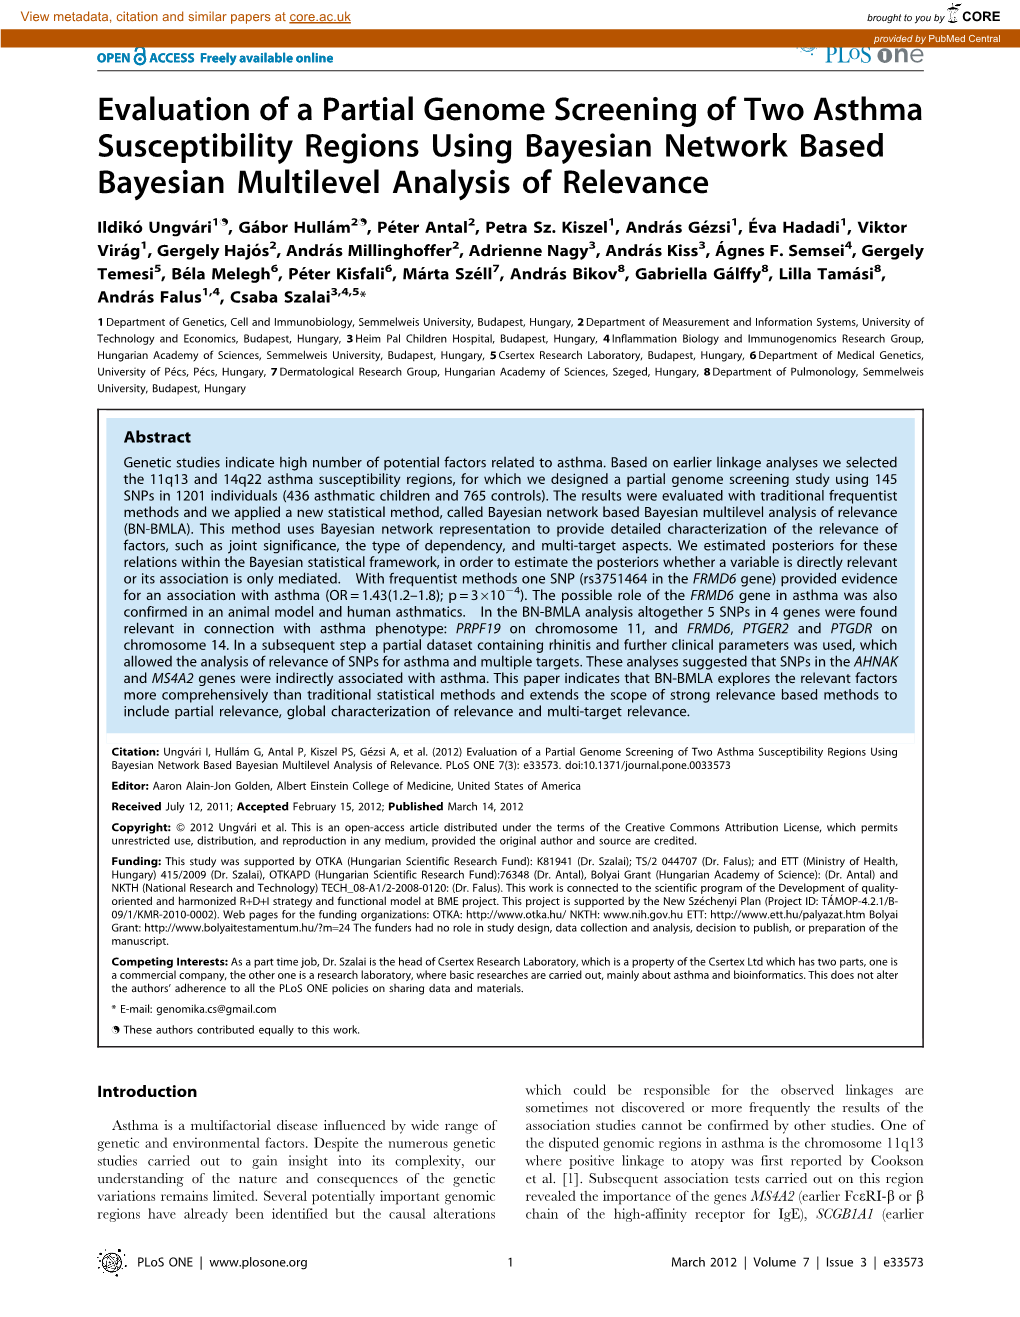 Evaluation of a Partial Genome Screening of Two Asthma Susceptibility Regions Using Bayesian Network Based Bayesian Multilevel Analysis of Relevance